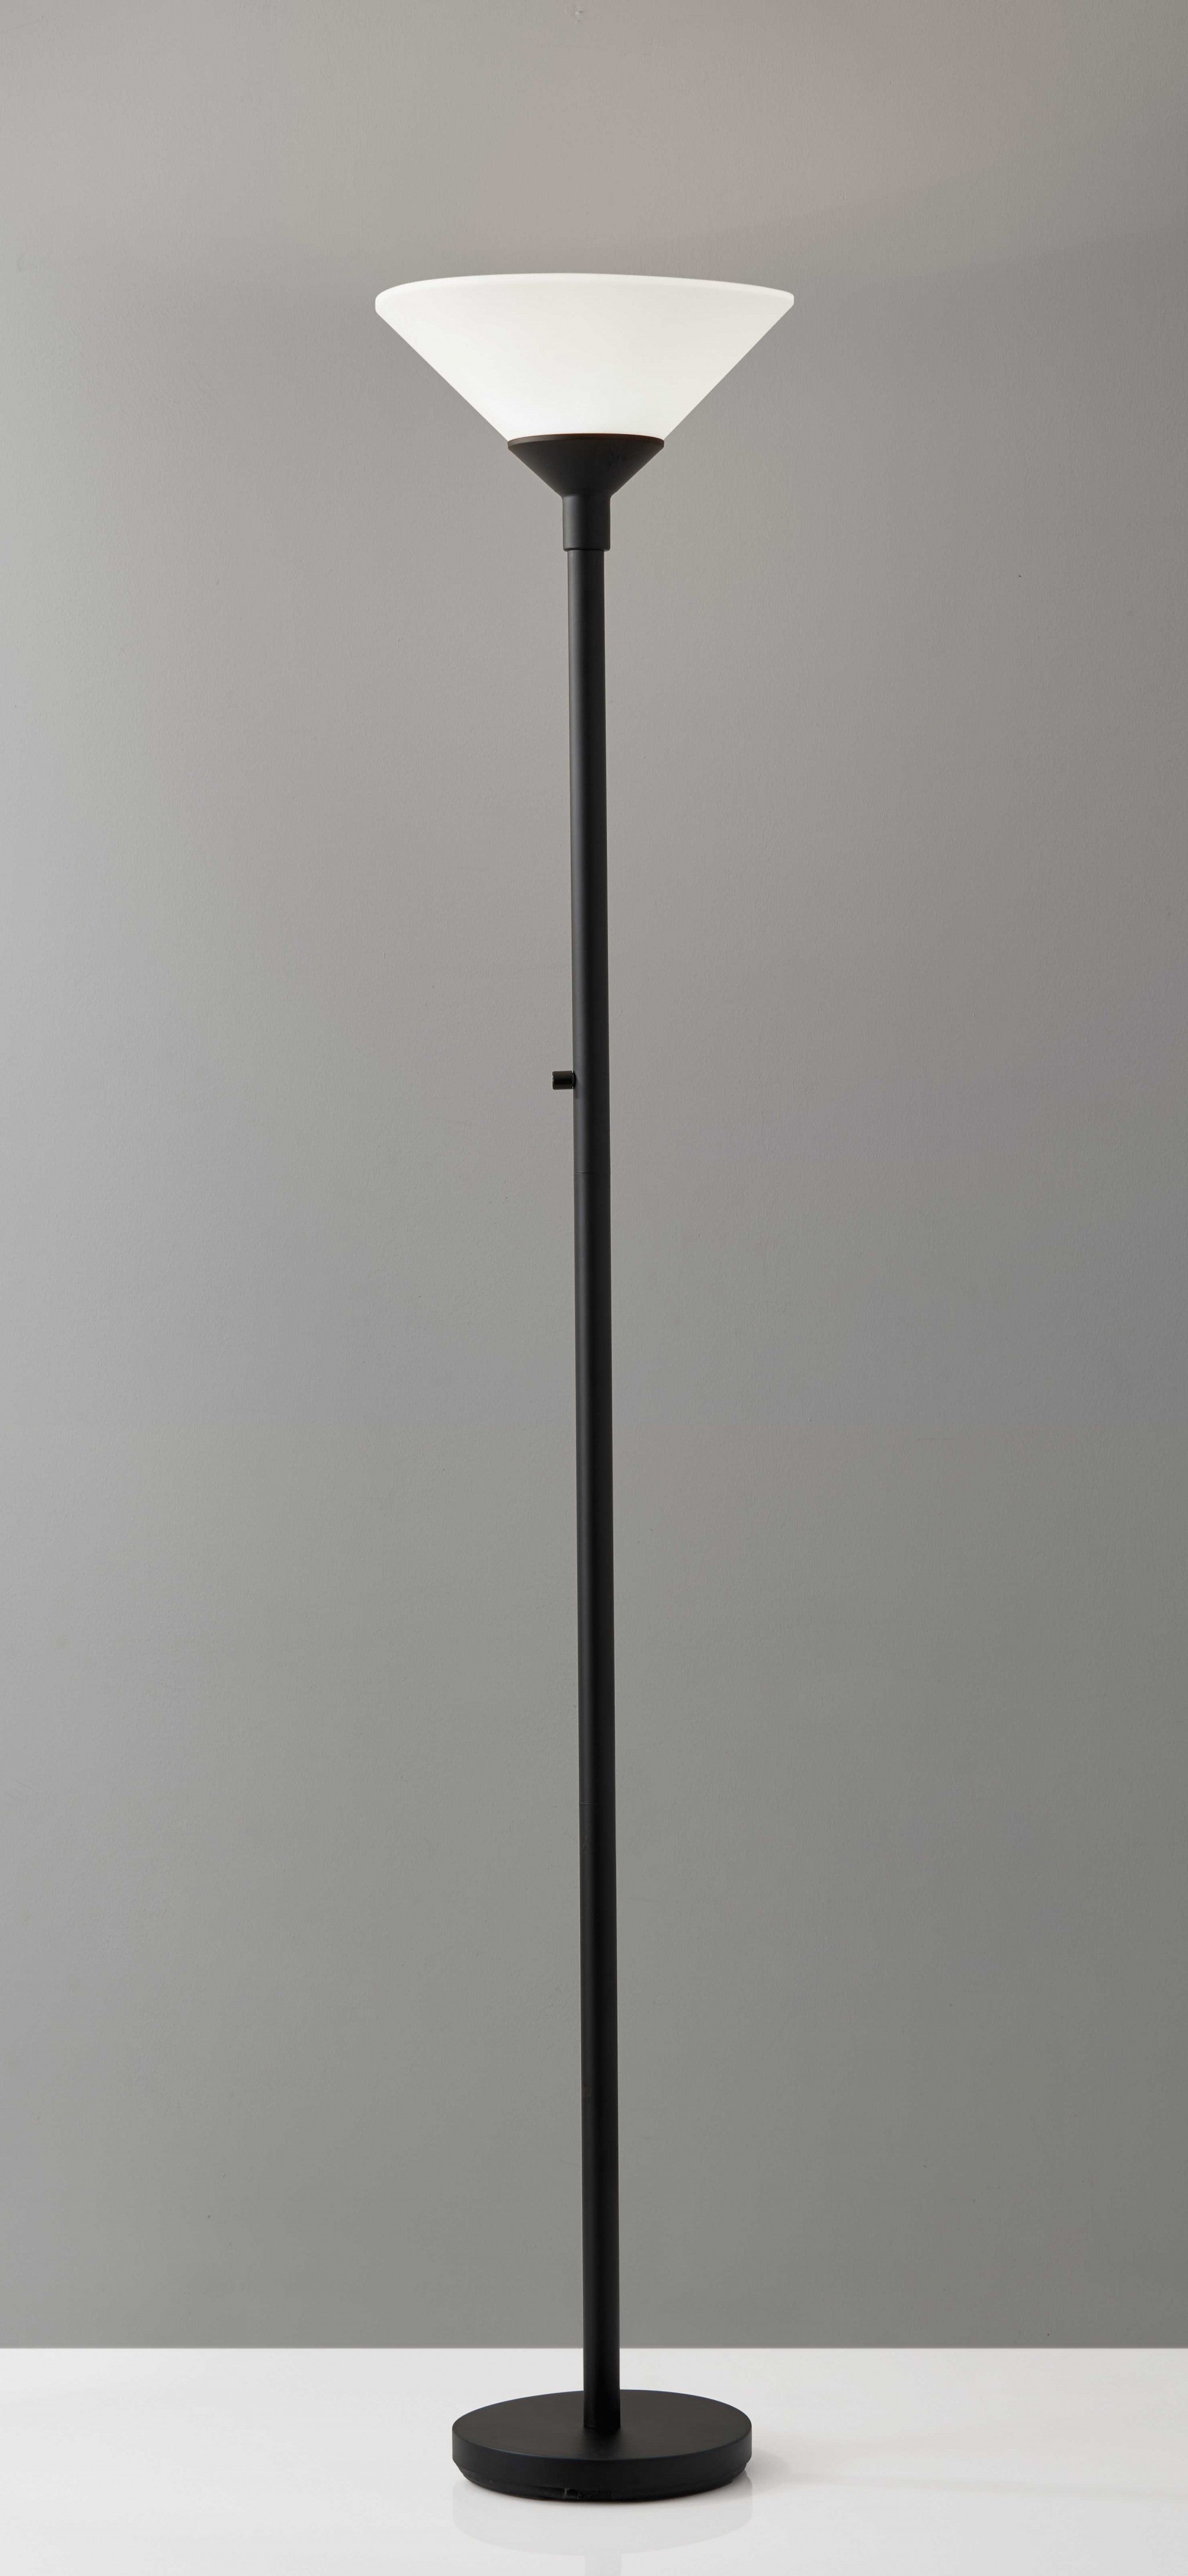 73" Torchiere Floor Lamp With White Cone Shade